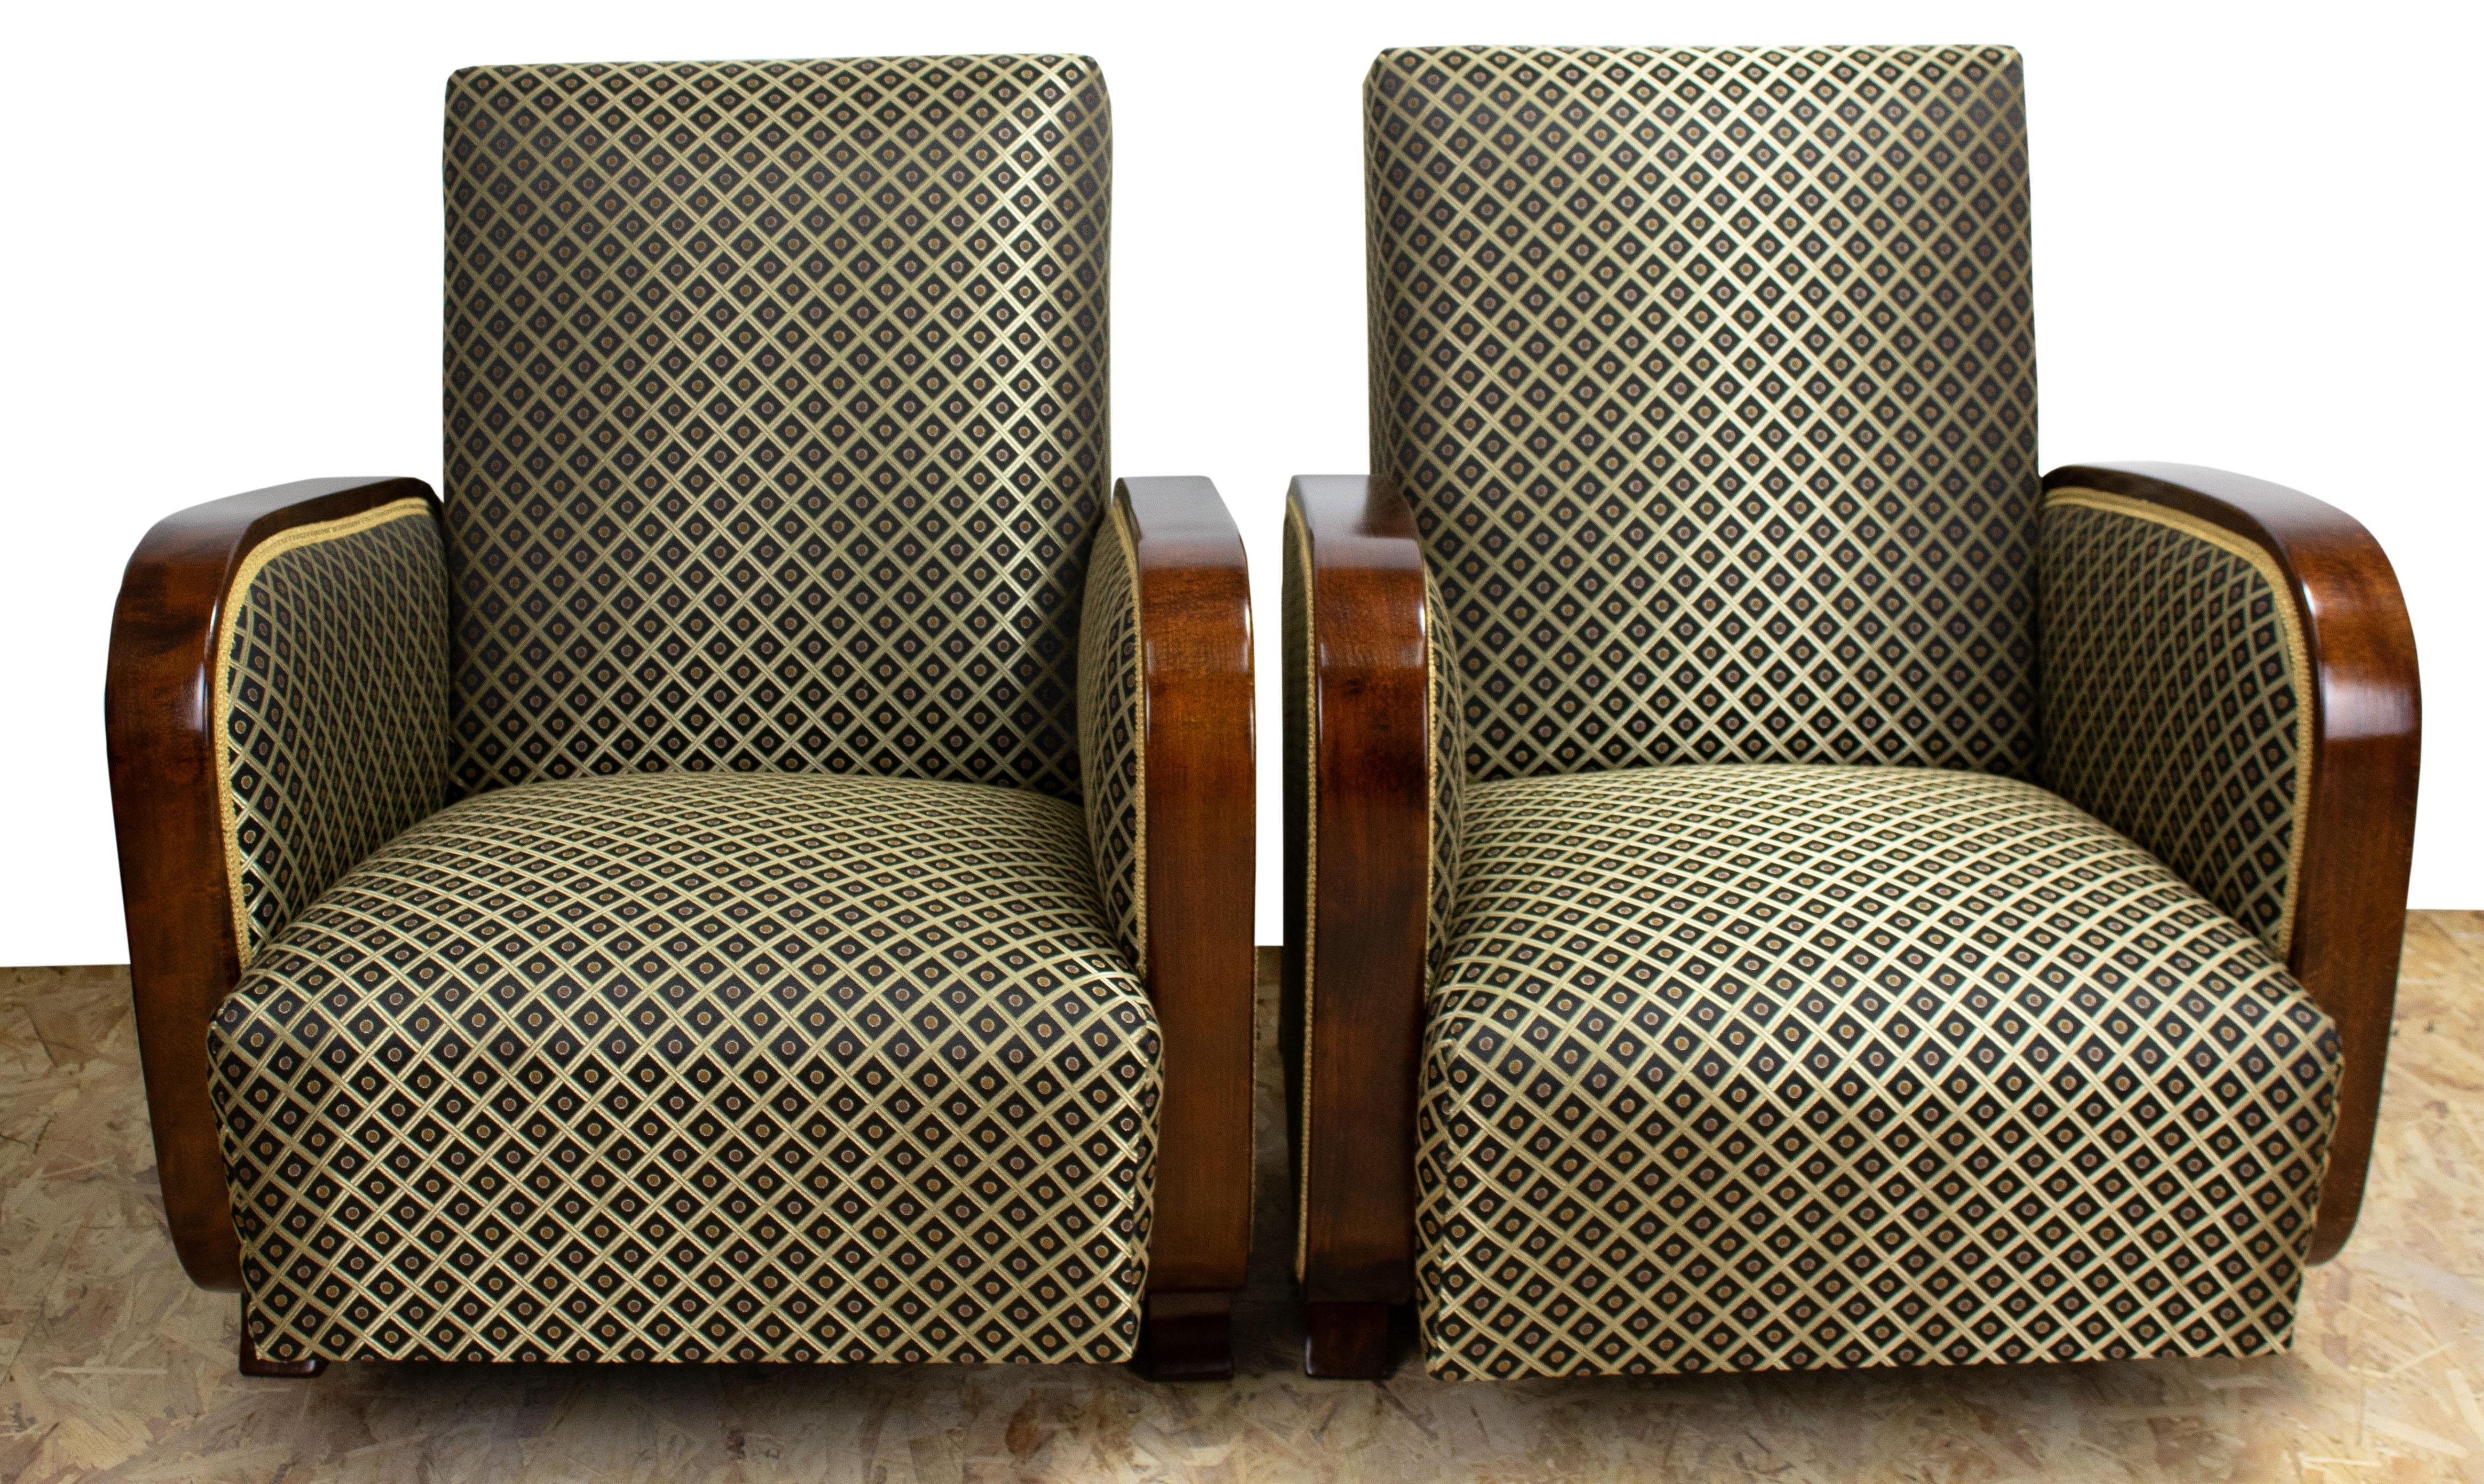 The armchairs were custom manufactured for the office of one Austrian bank director. Exclusive fabrics werte used. The wooden parts and upholstery were restored, using period manufacturing techniques. The armchairs provide a very comfortable seating.